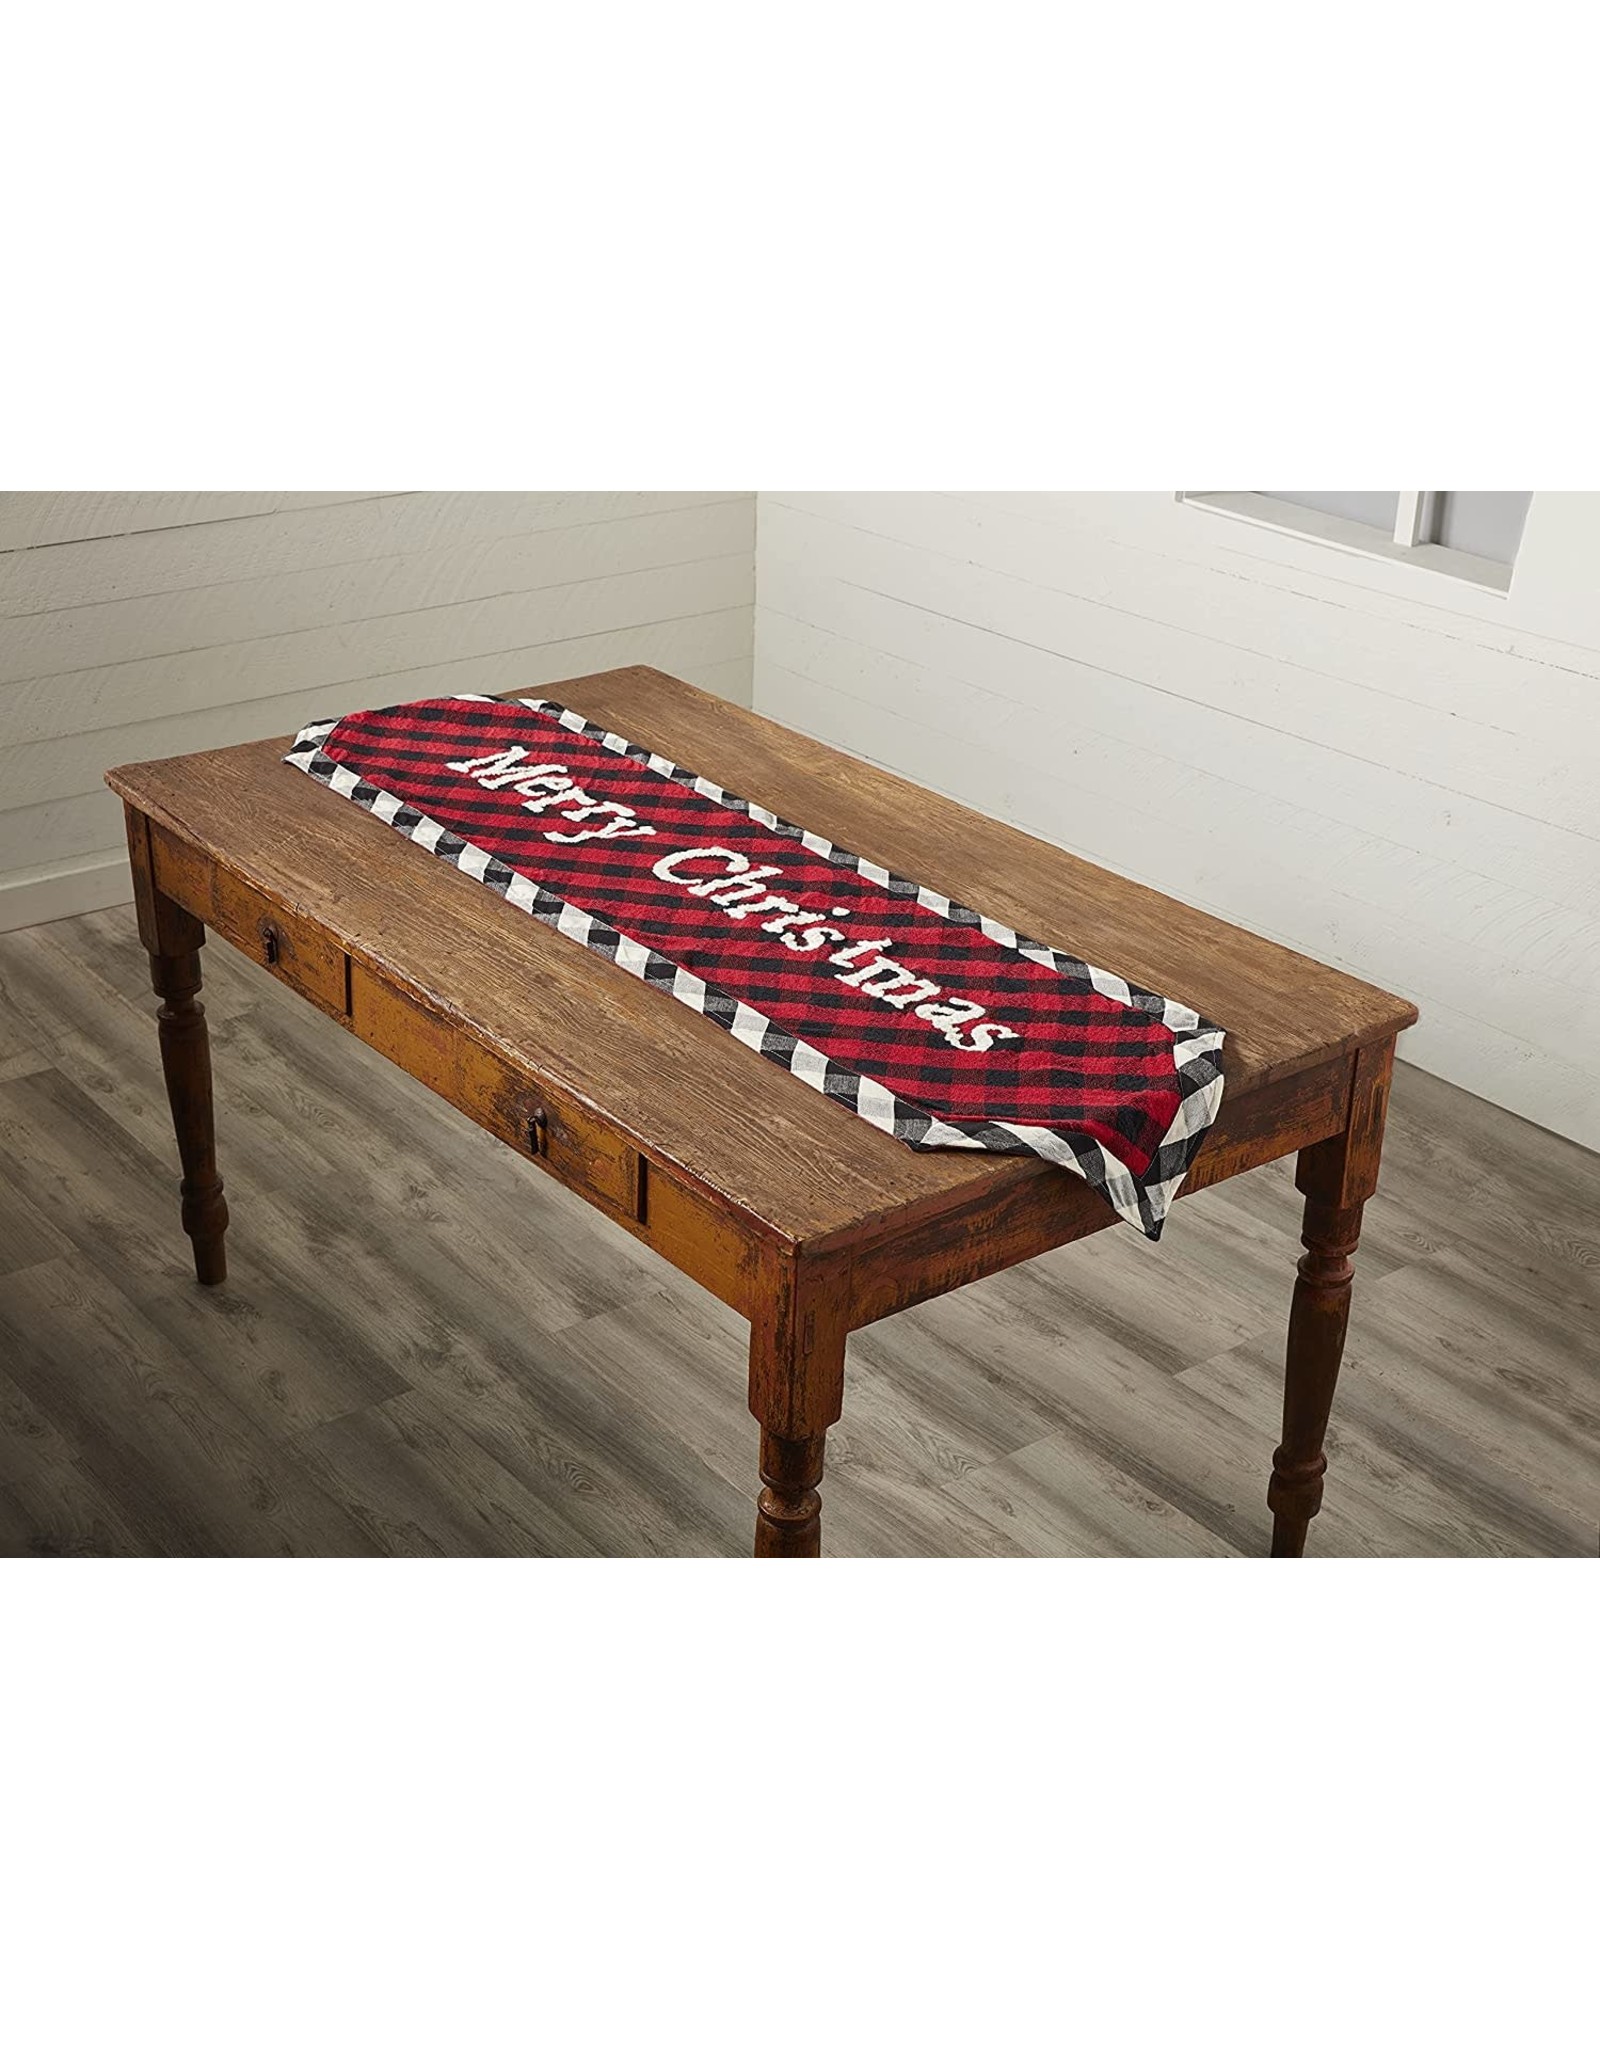 Mud Pie Christmas Table Runner 18x72 Inch Red Check w Merry Christmas